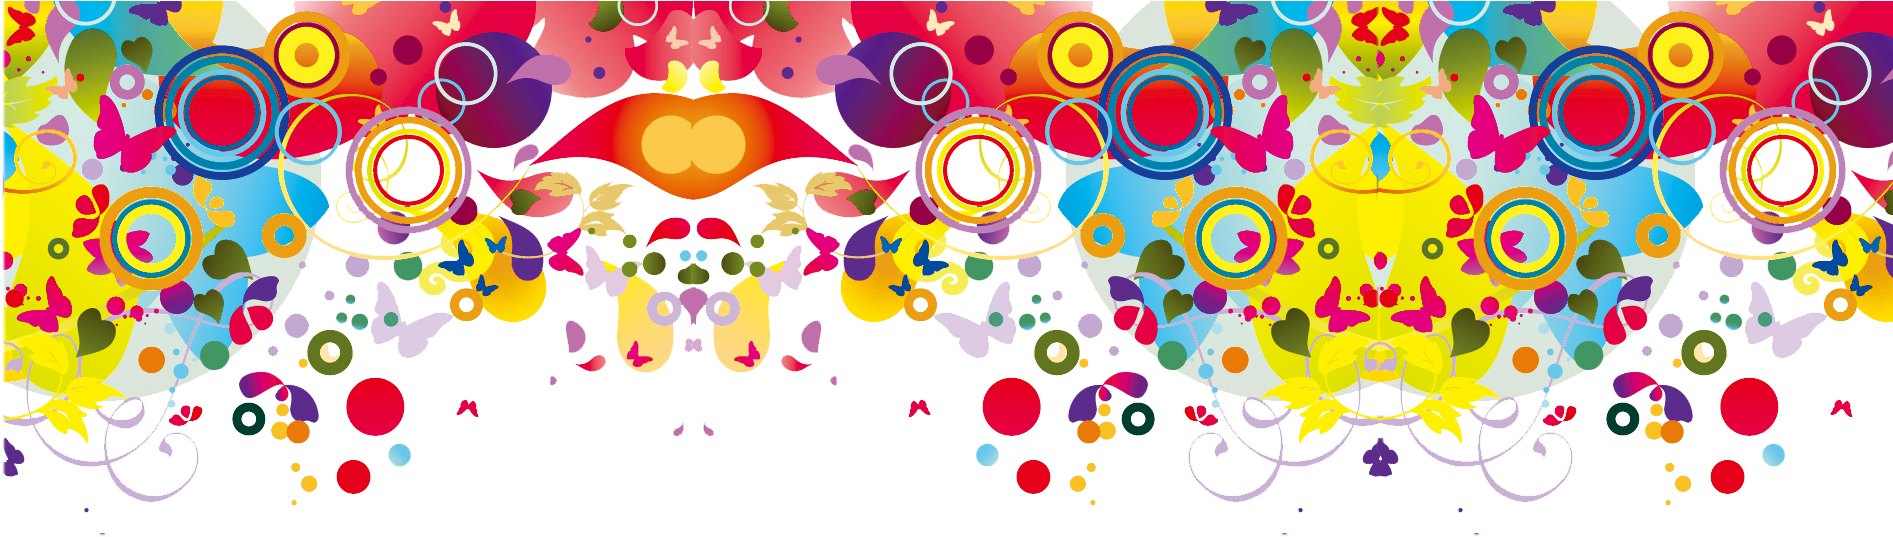 A Colorful Design With Butterflies And Circles